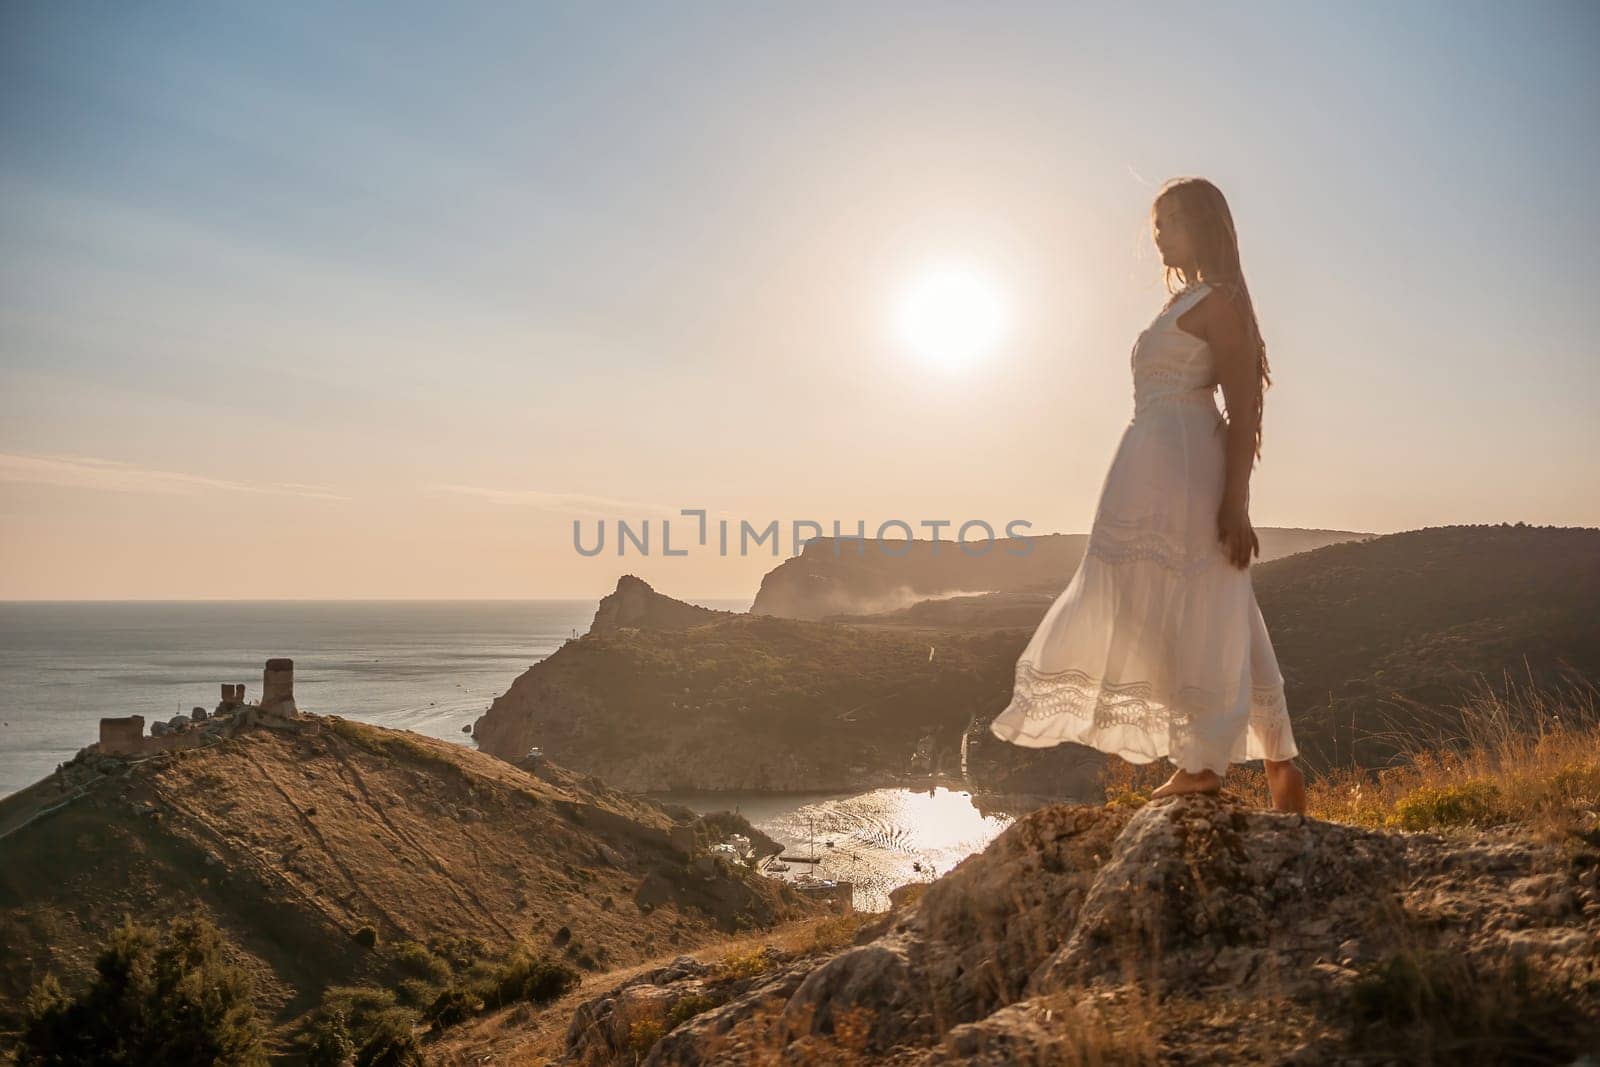 A woman stands on a rocky hill overlooking the ocean. She is wearing a white dress and she is enjoying the view. The scene is serene and peaceful, with the sun shining brightly in the background